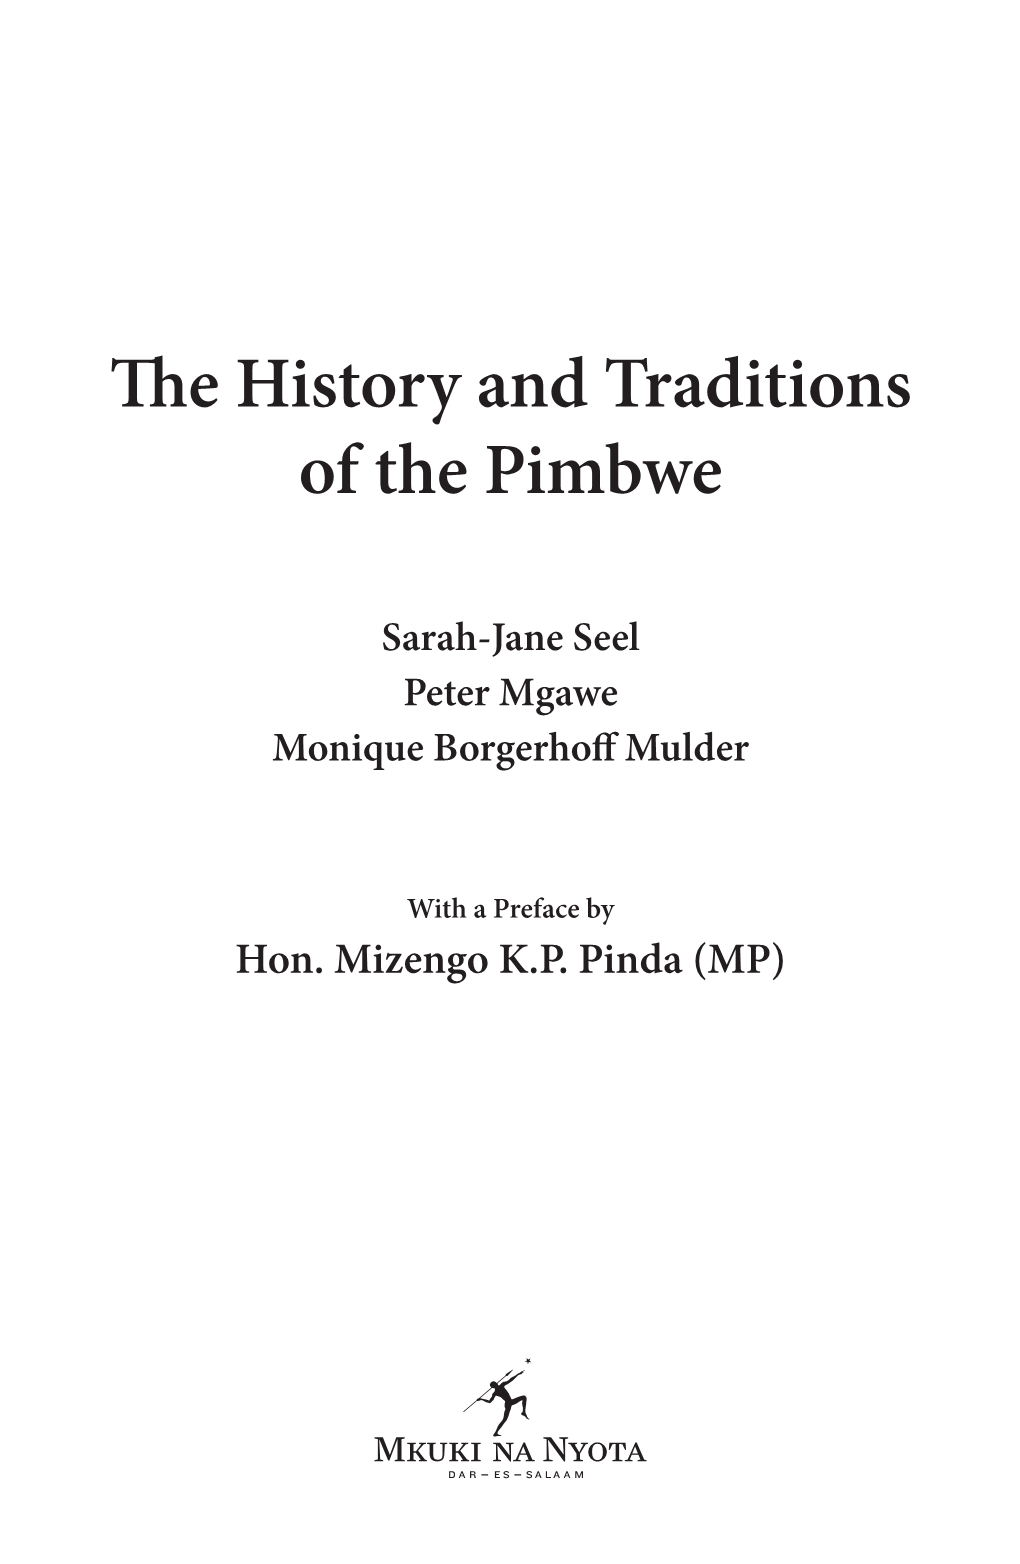 The History and Traditions of the Pimbwe